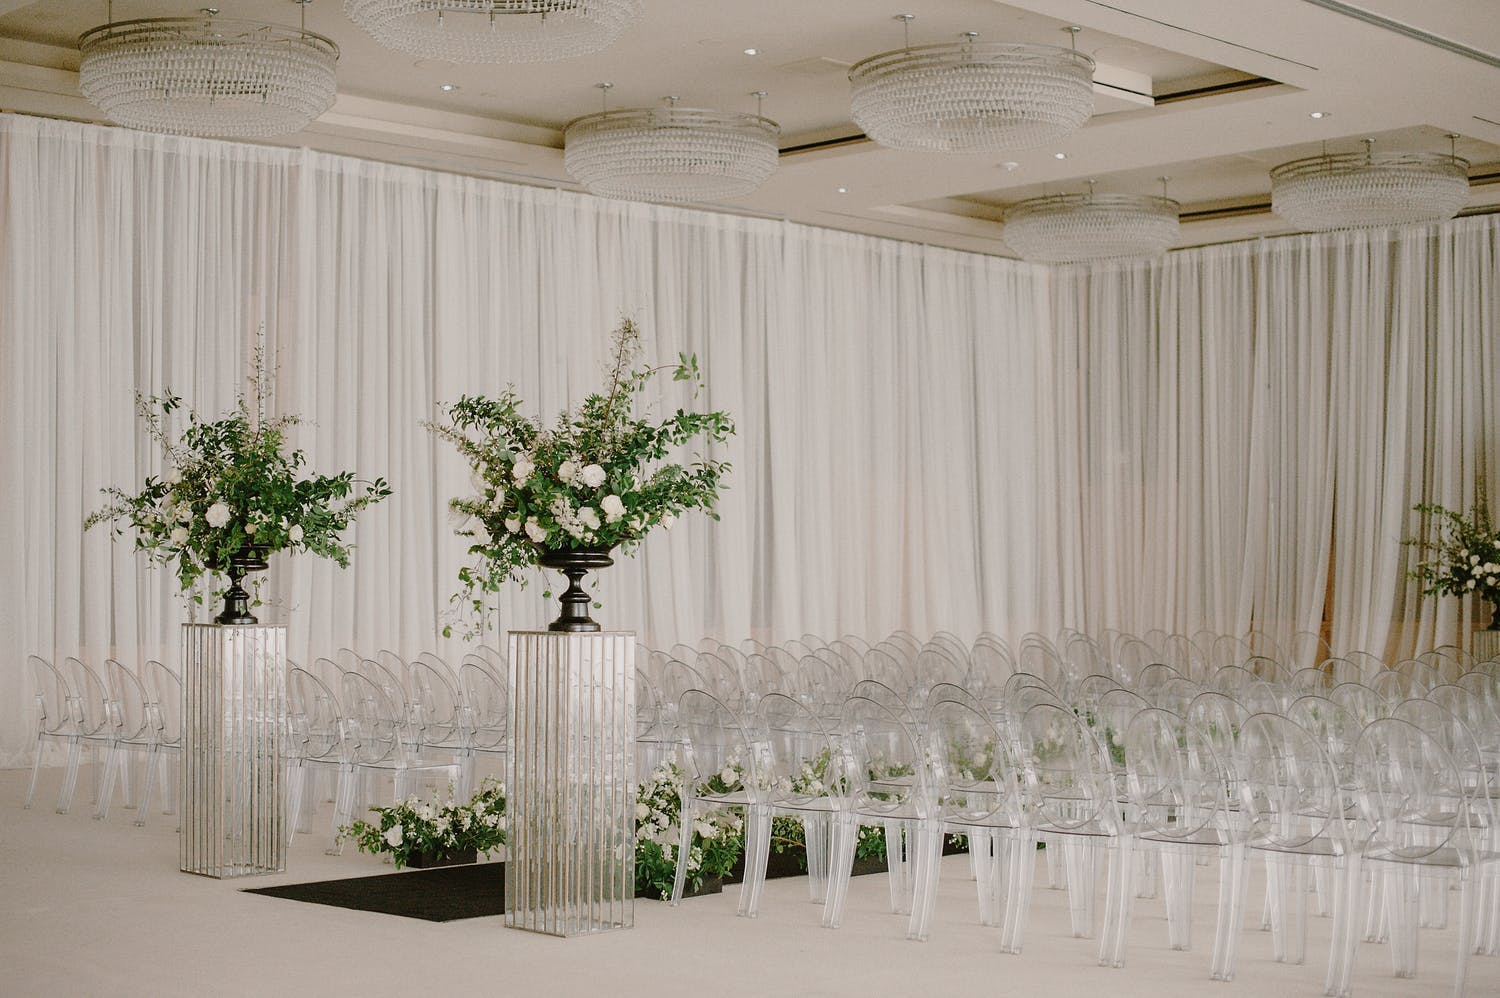 Monochromatic Light Gray Ceremony With Modern Wedding Décor Elements Like Lucite Floral Stands, Gray Drapery, and Ghost Chairs | PartySlate